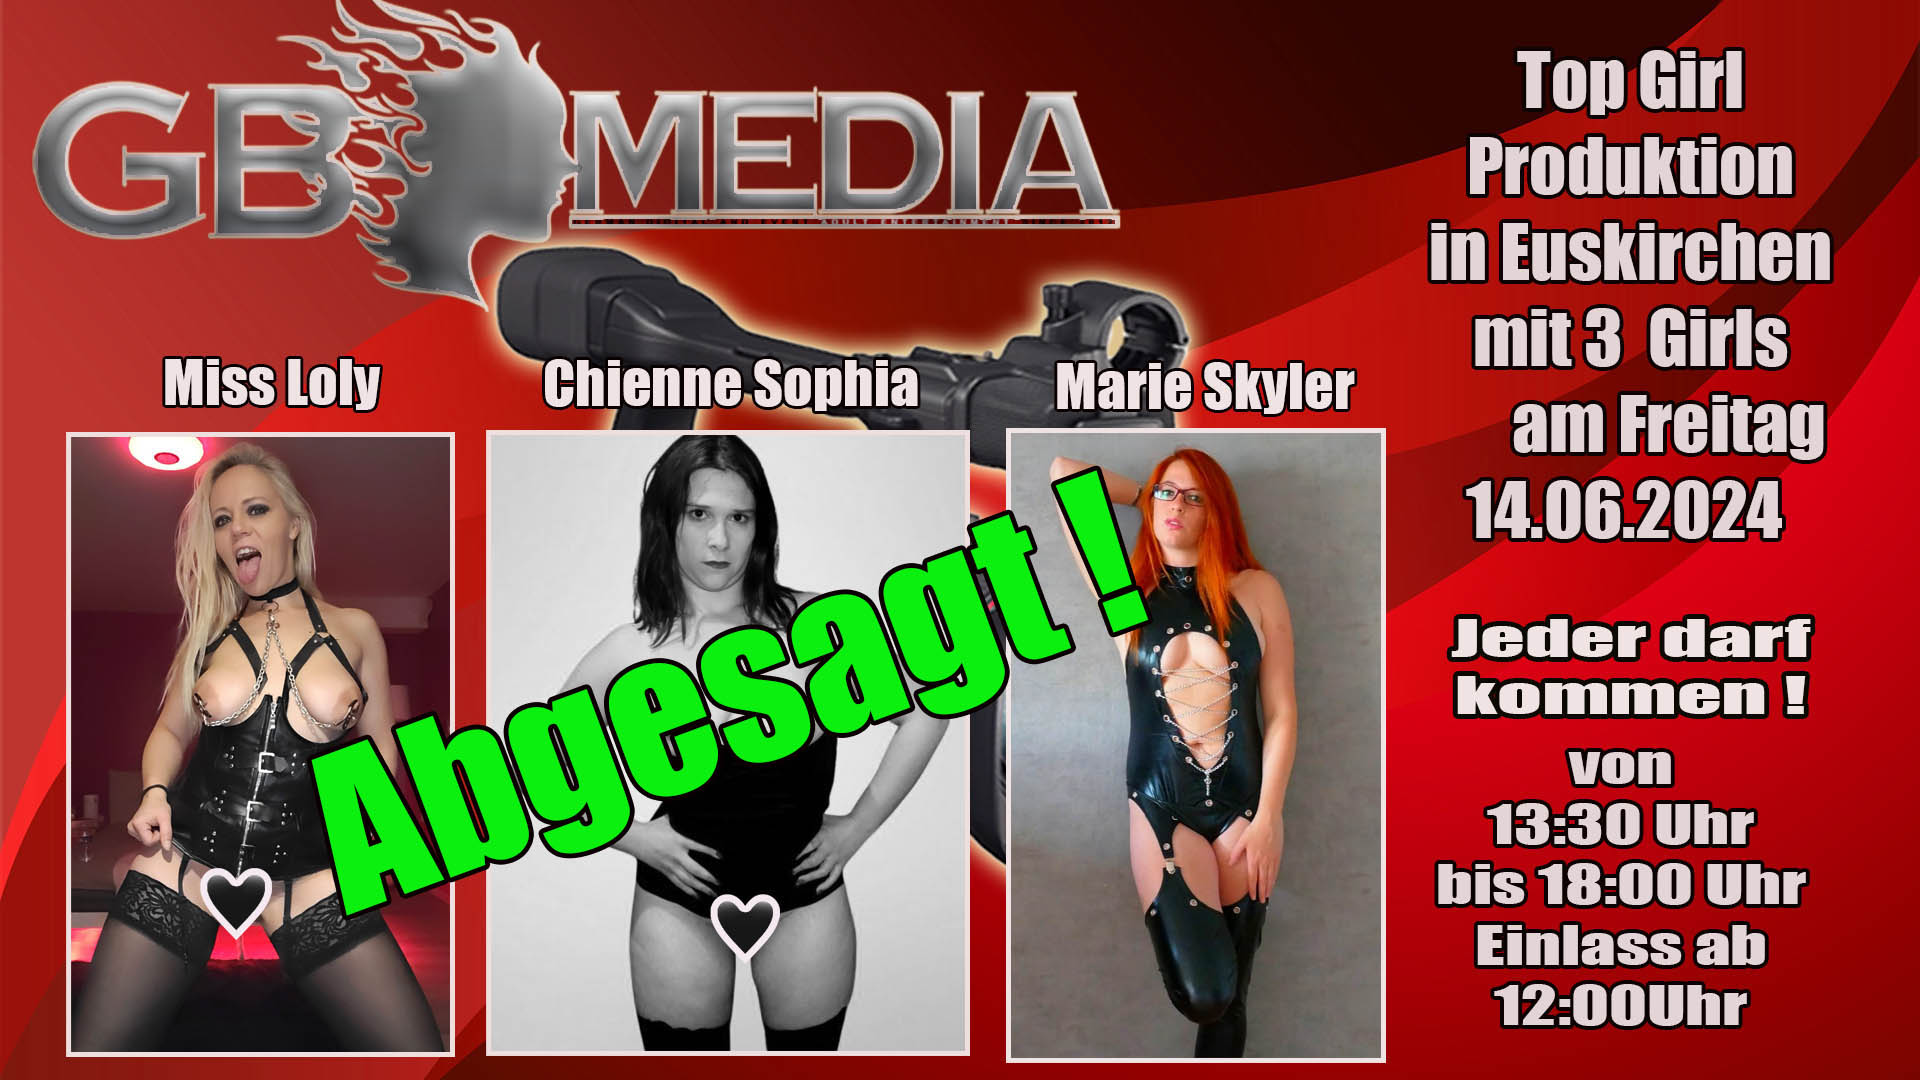 Top Girl Produktion am 14.06.2024 in Euskirchen thumb image